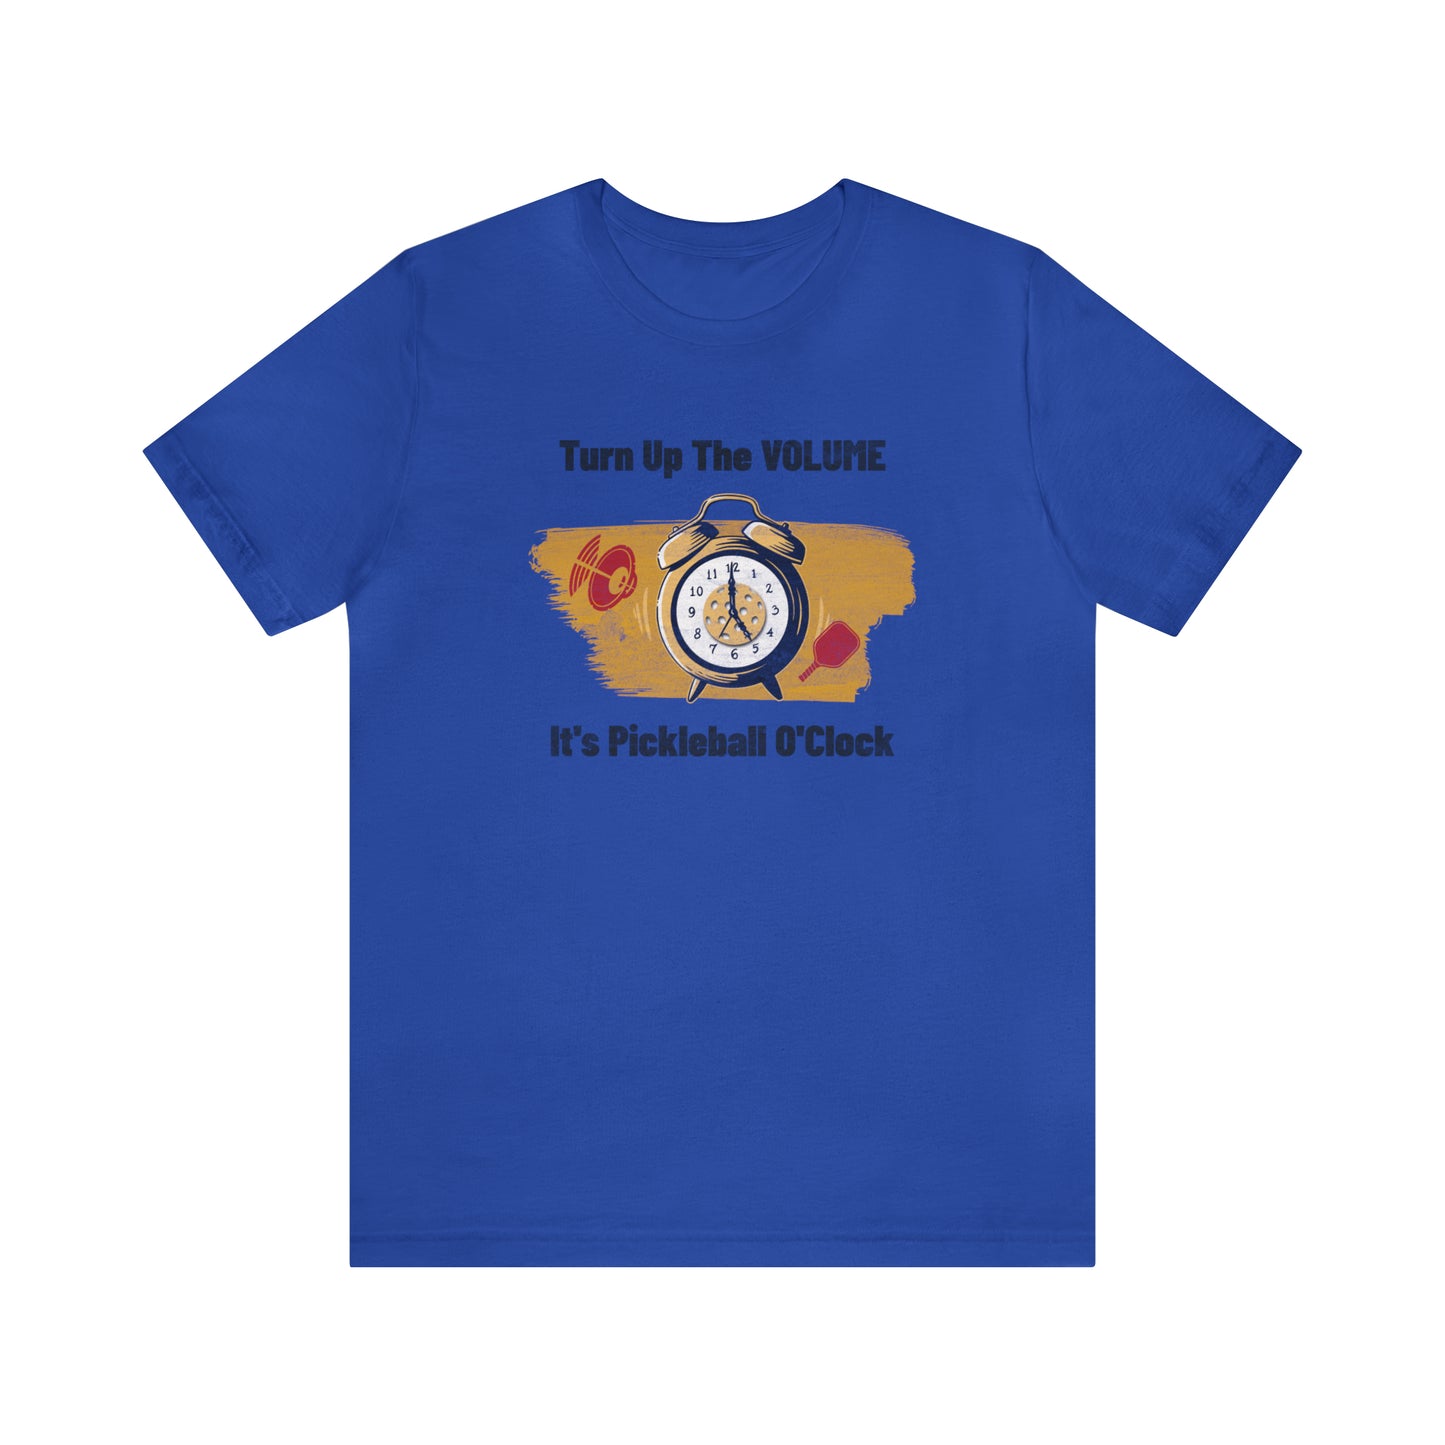 Pickleball Time: T-Shirt for Passionate Pickleball Players